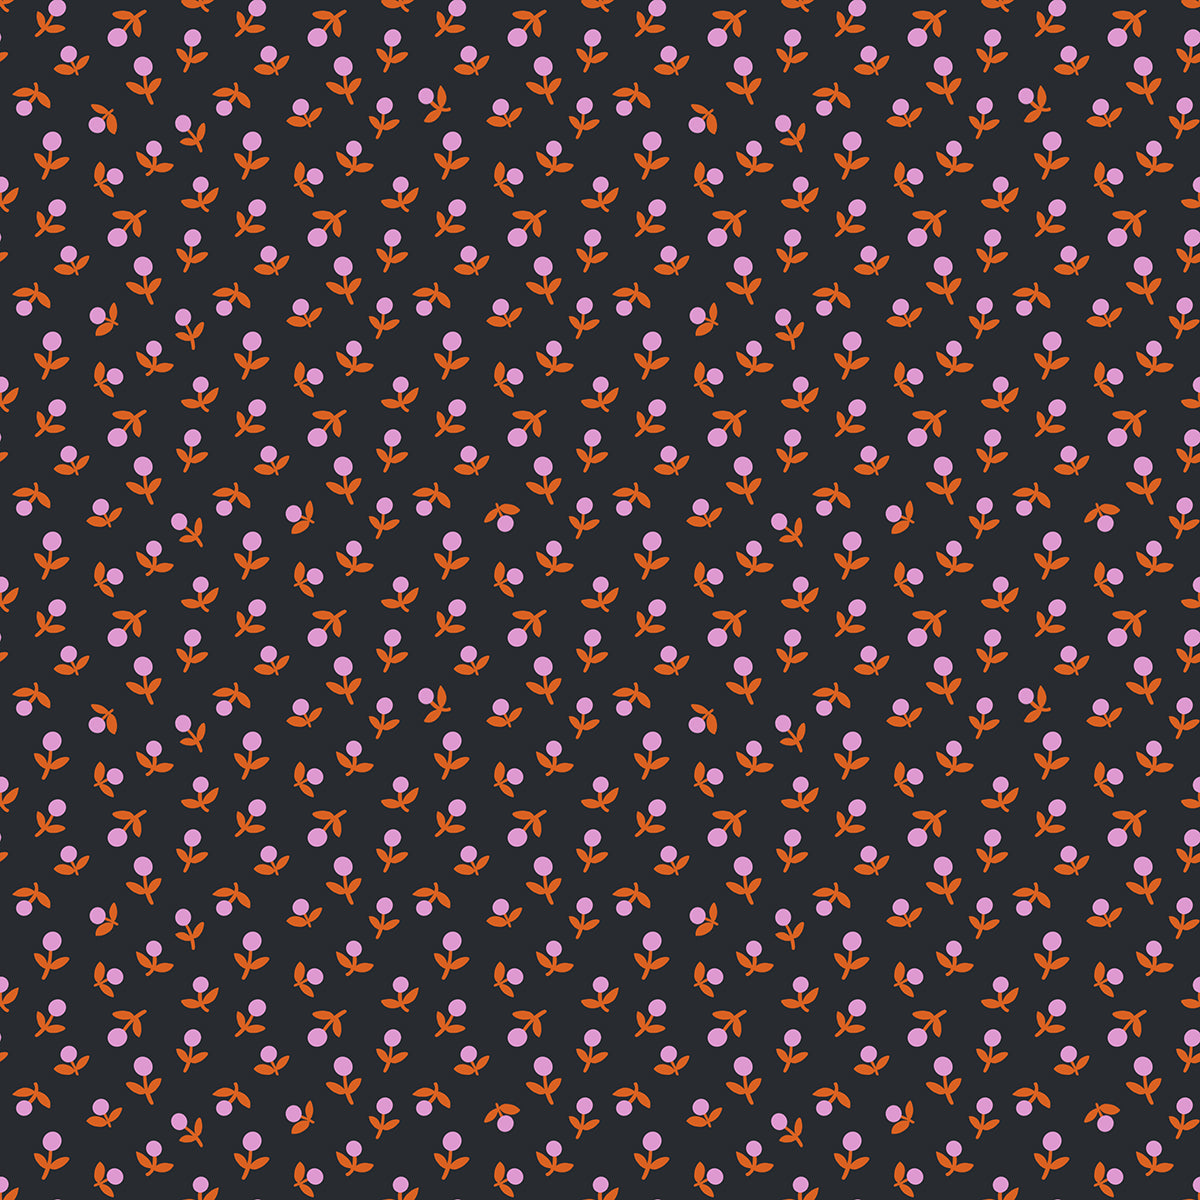 Sprout- Soft Black from Meadow Star by Alexia Abegg for Moda Fabrics